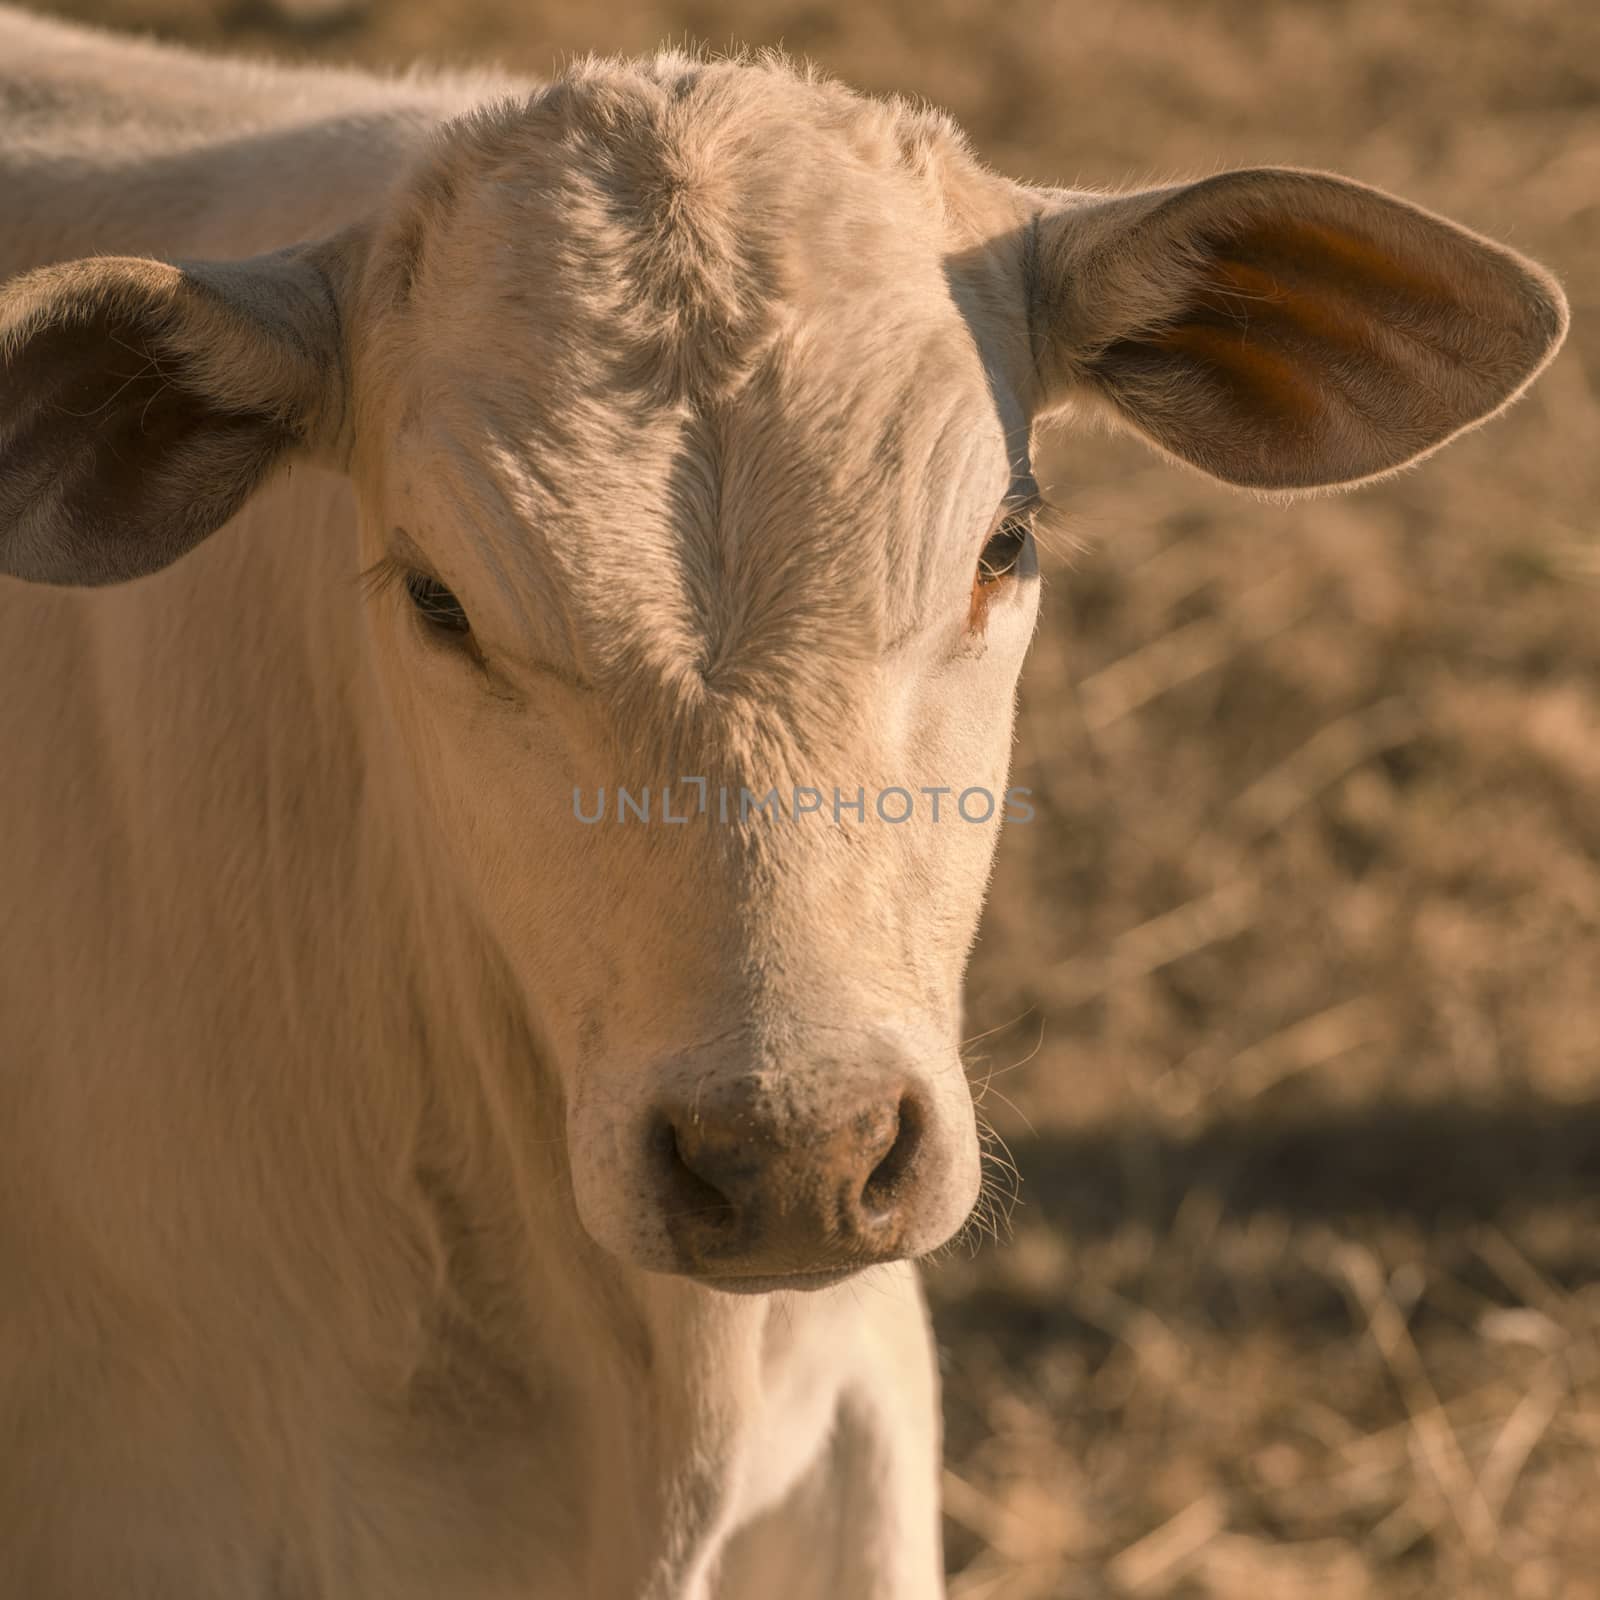 Baby cow in the countryside during the day in Queensland.